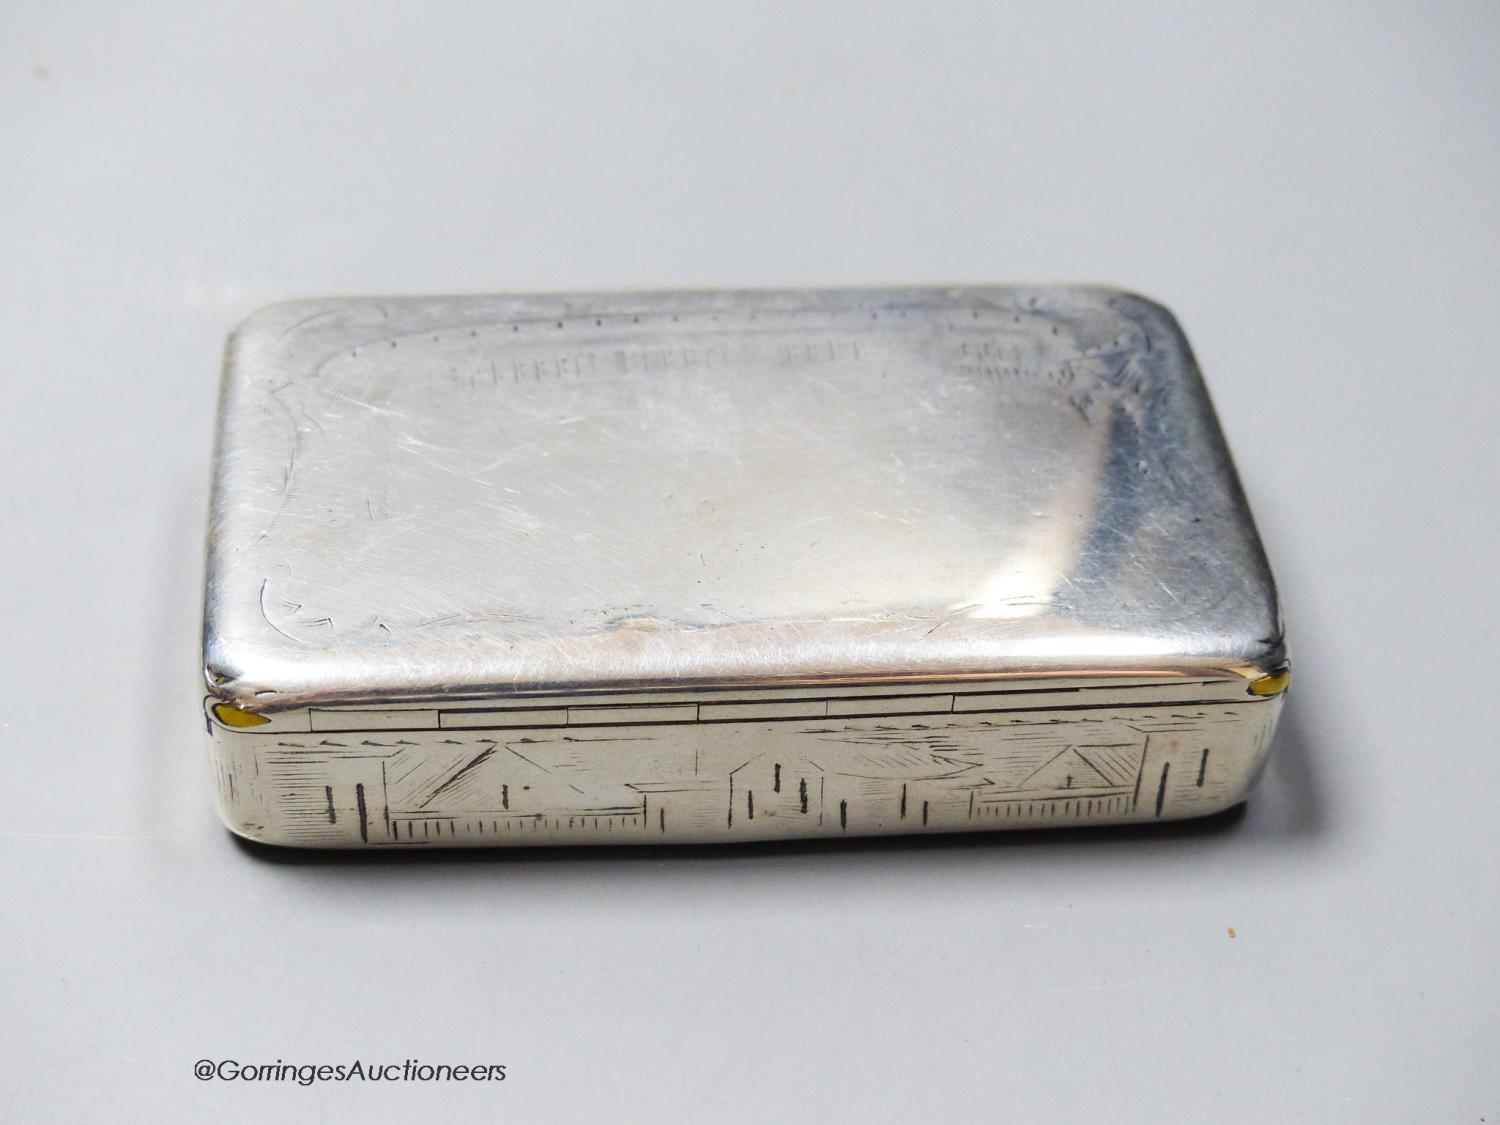 A mid 19th century Russian 84 zolotnik snuff box, with engraved decoration(very tired), dated 1843, - Image 2 of 3